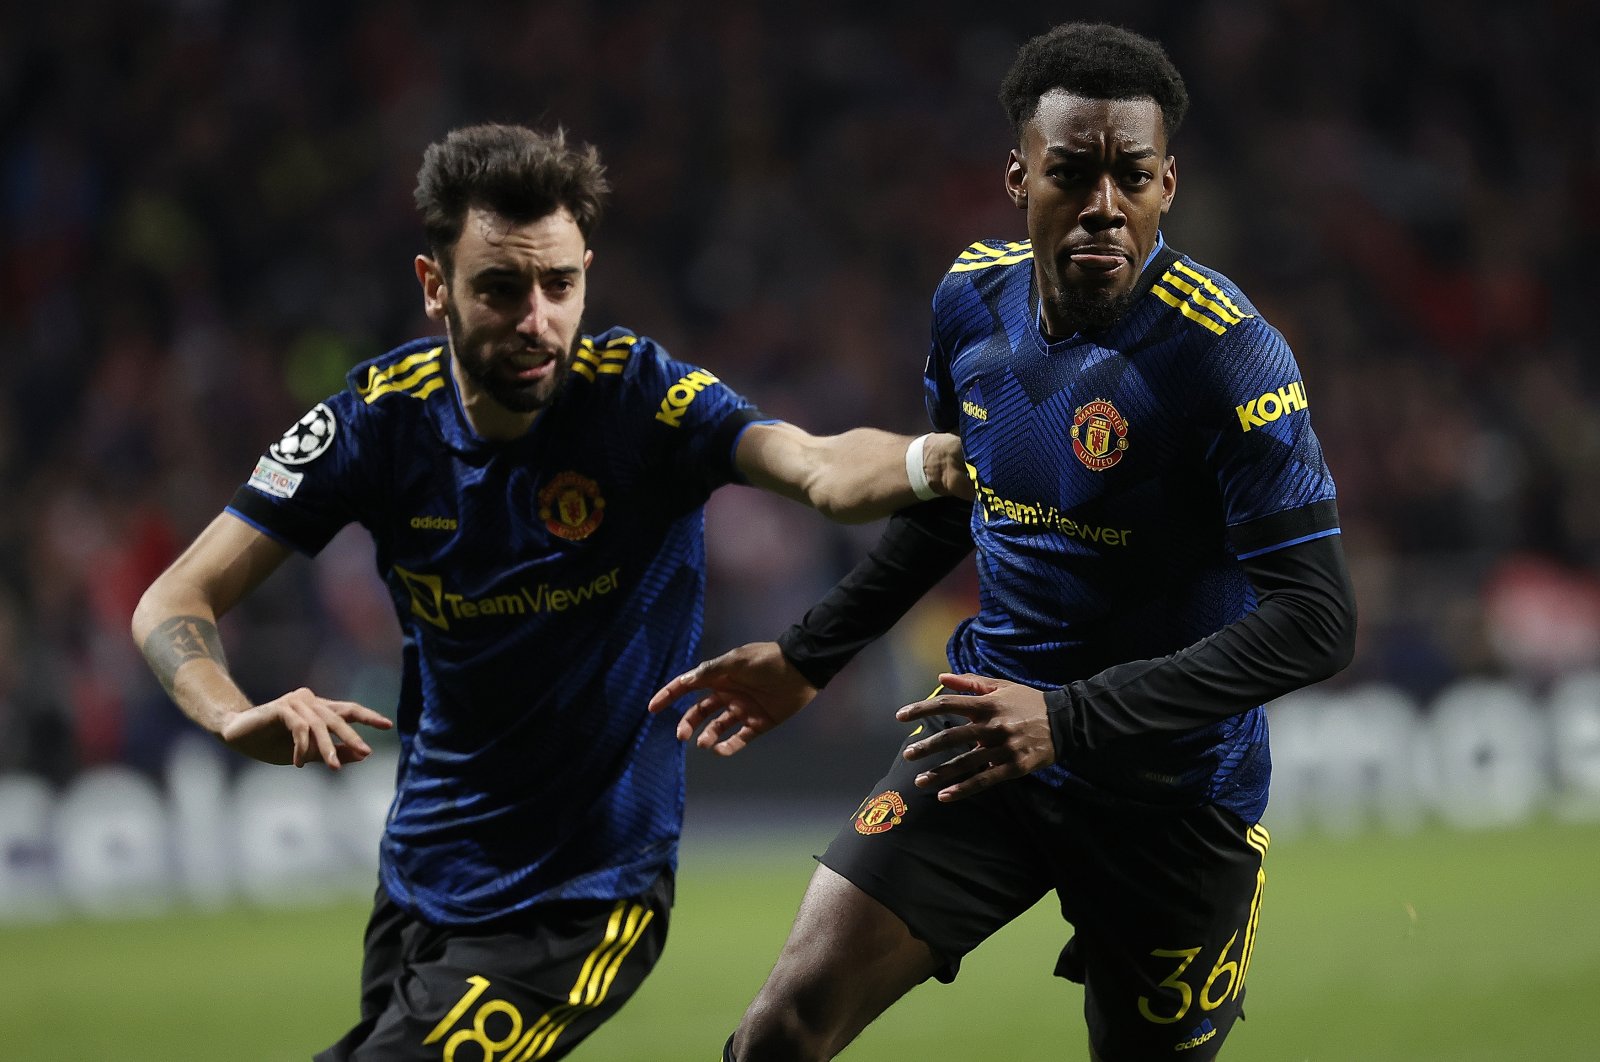 Manchester United&#039;s Anthony Elanga (R) celebrates with teammate Bruno Fernandes after scoring in a Champions League game against Atletico Madrid, Madrid, Spain, Feb. 23, 2022. (AA Photo)